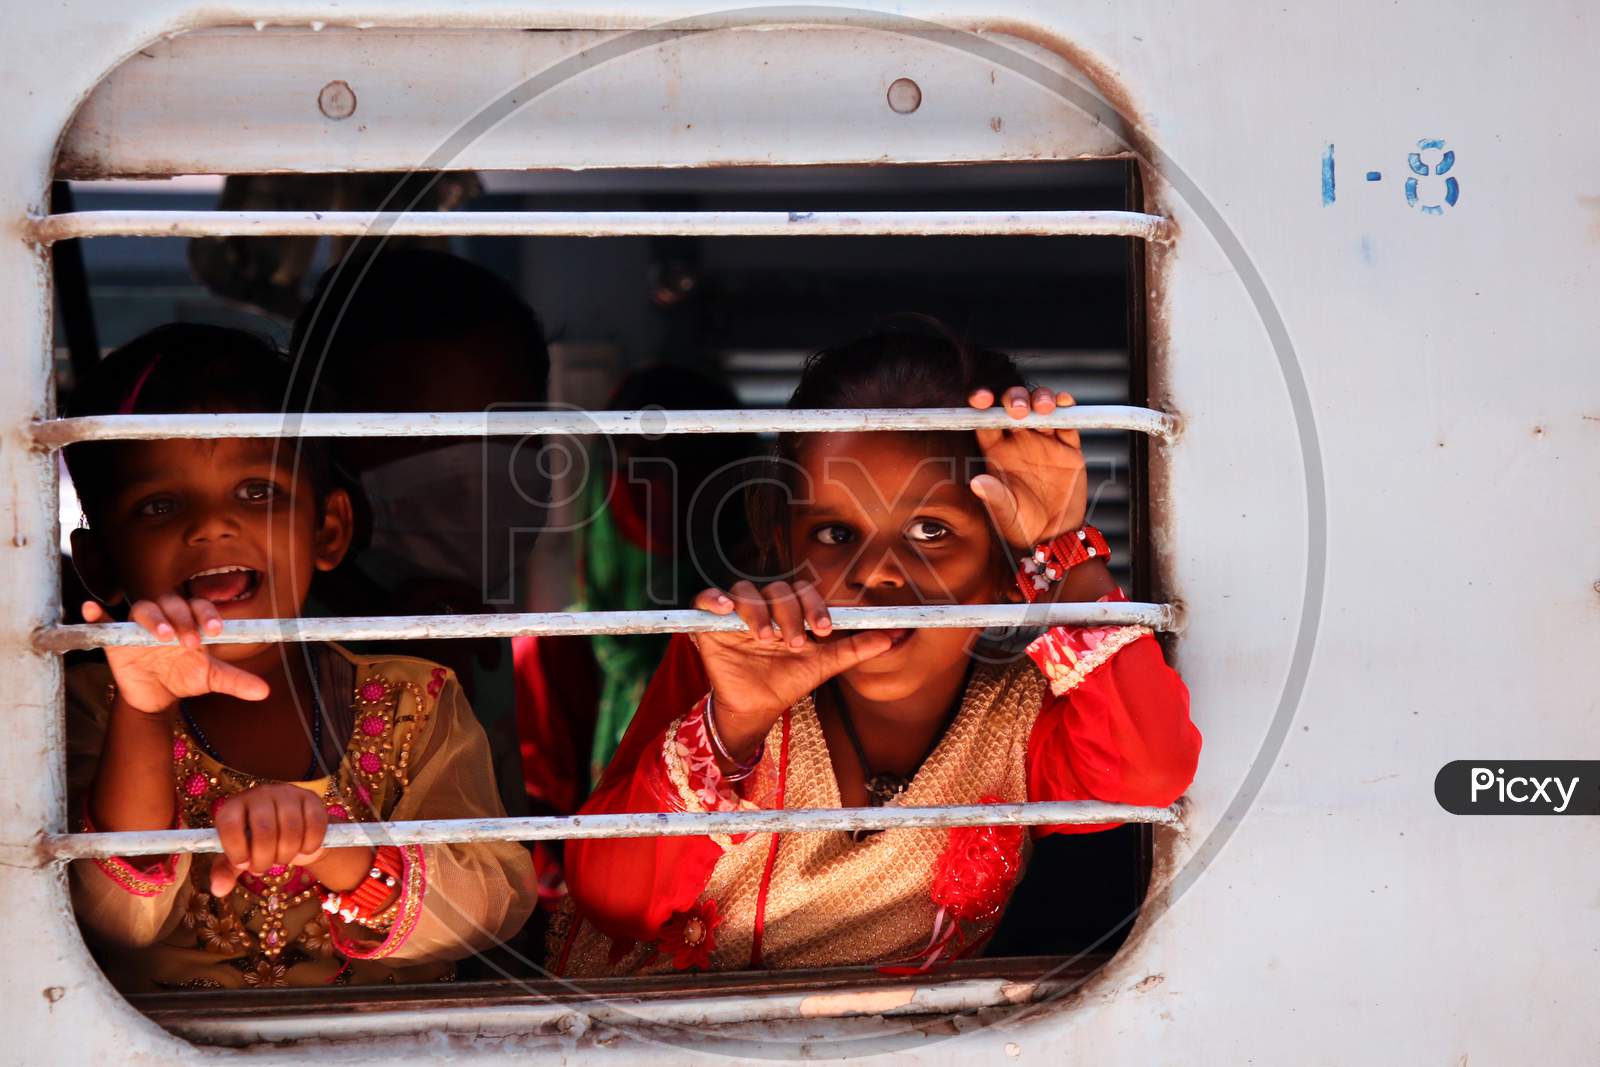 Stranded migrants board a special train to Bihar State from Ajmer railway station during a government-imposed nationwide lockdown as a preventive measure against the COVID-19 coronavirus, in Ajmer on May 13, 2020.